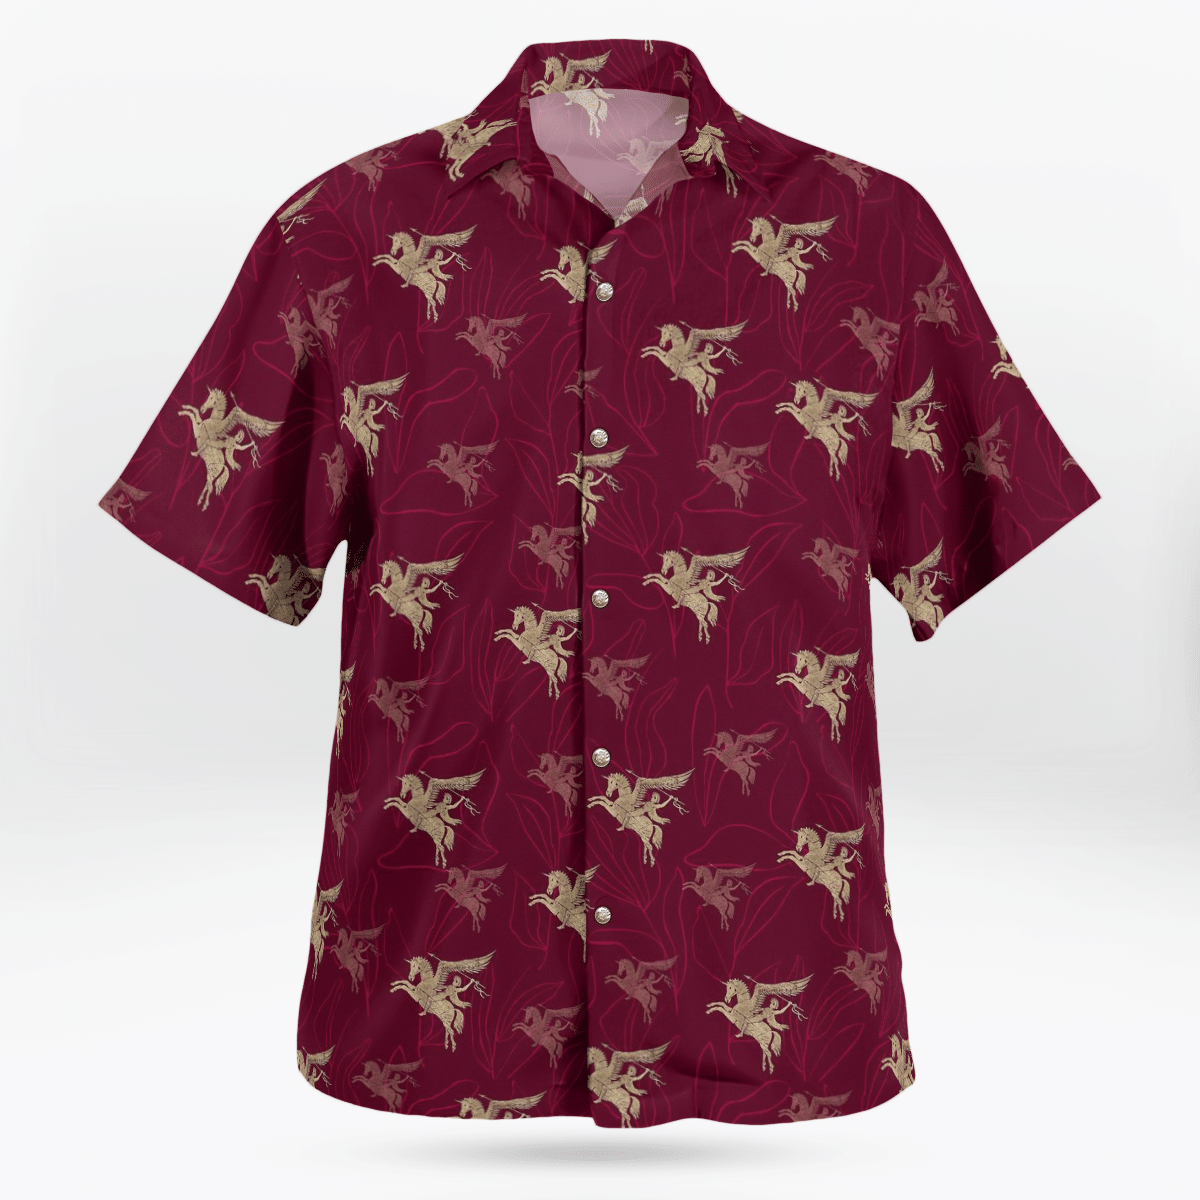 Hawaiian shirts never go out of style 251